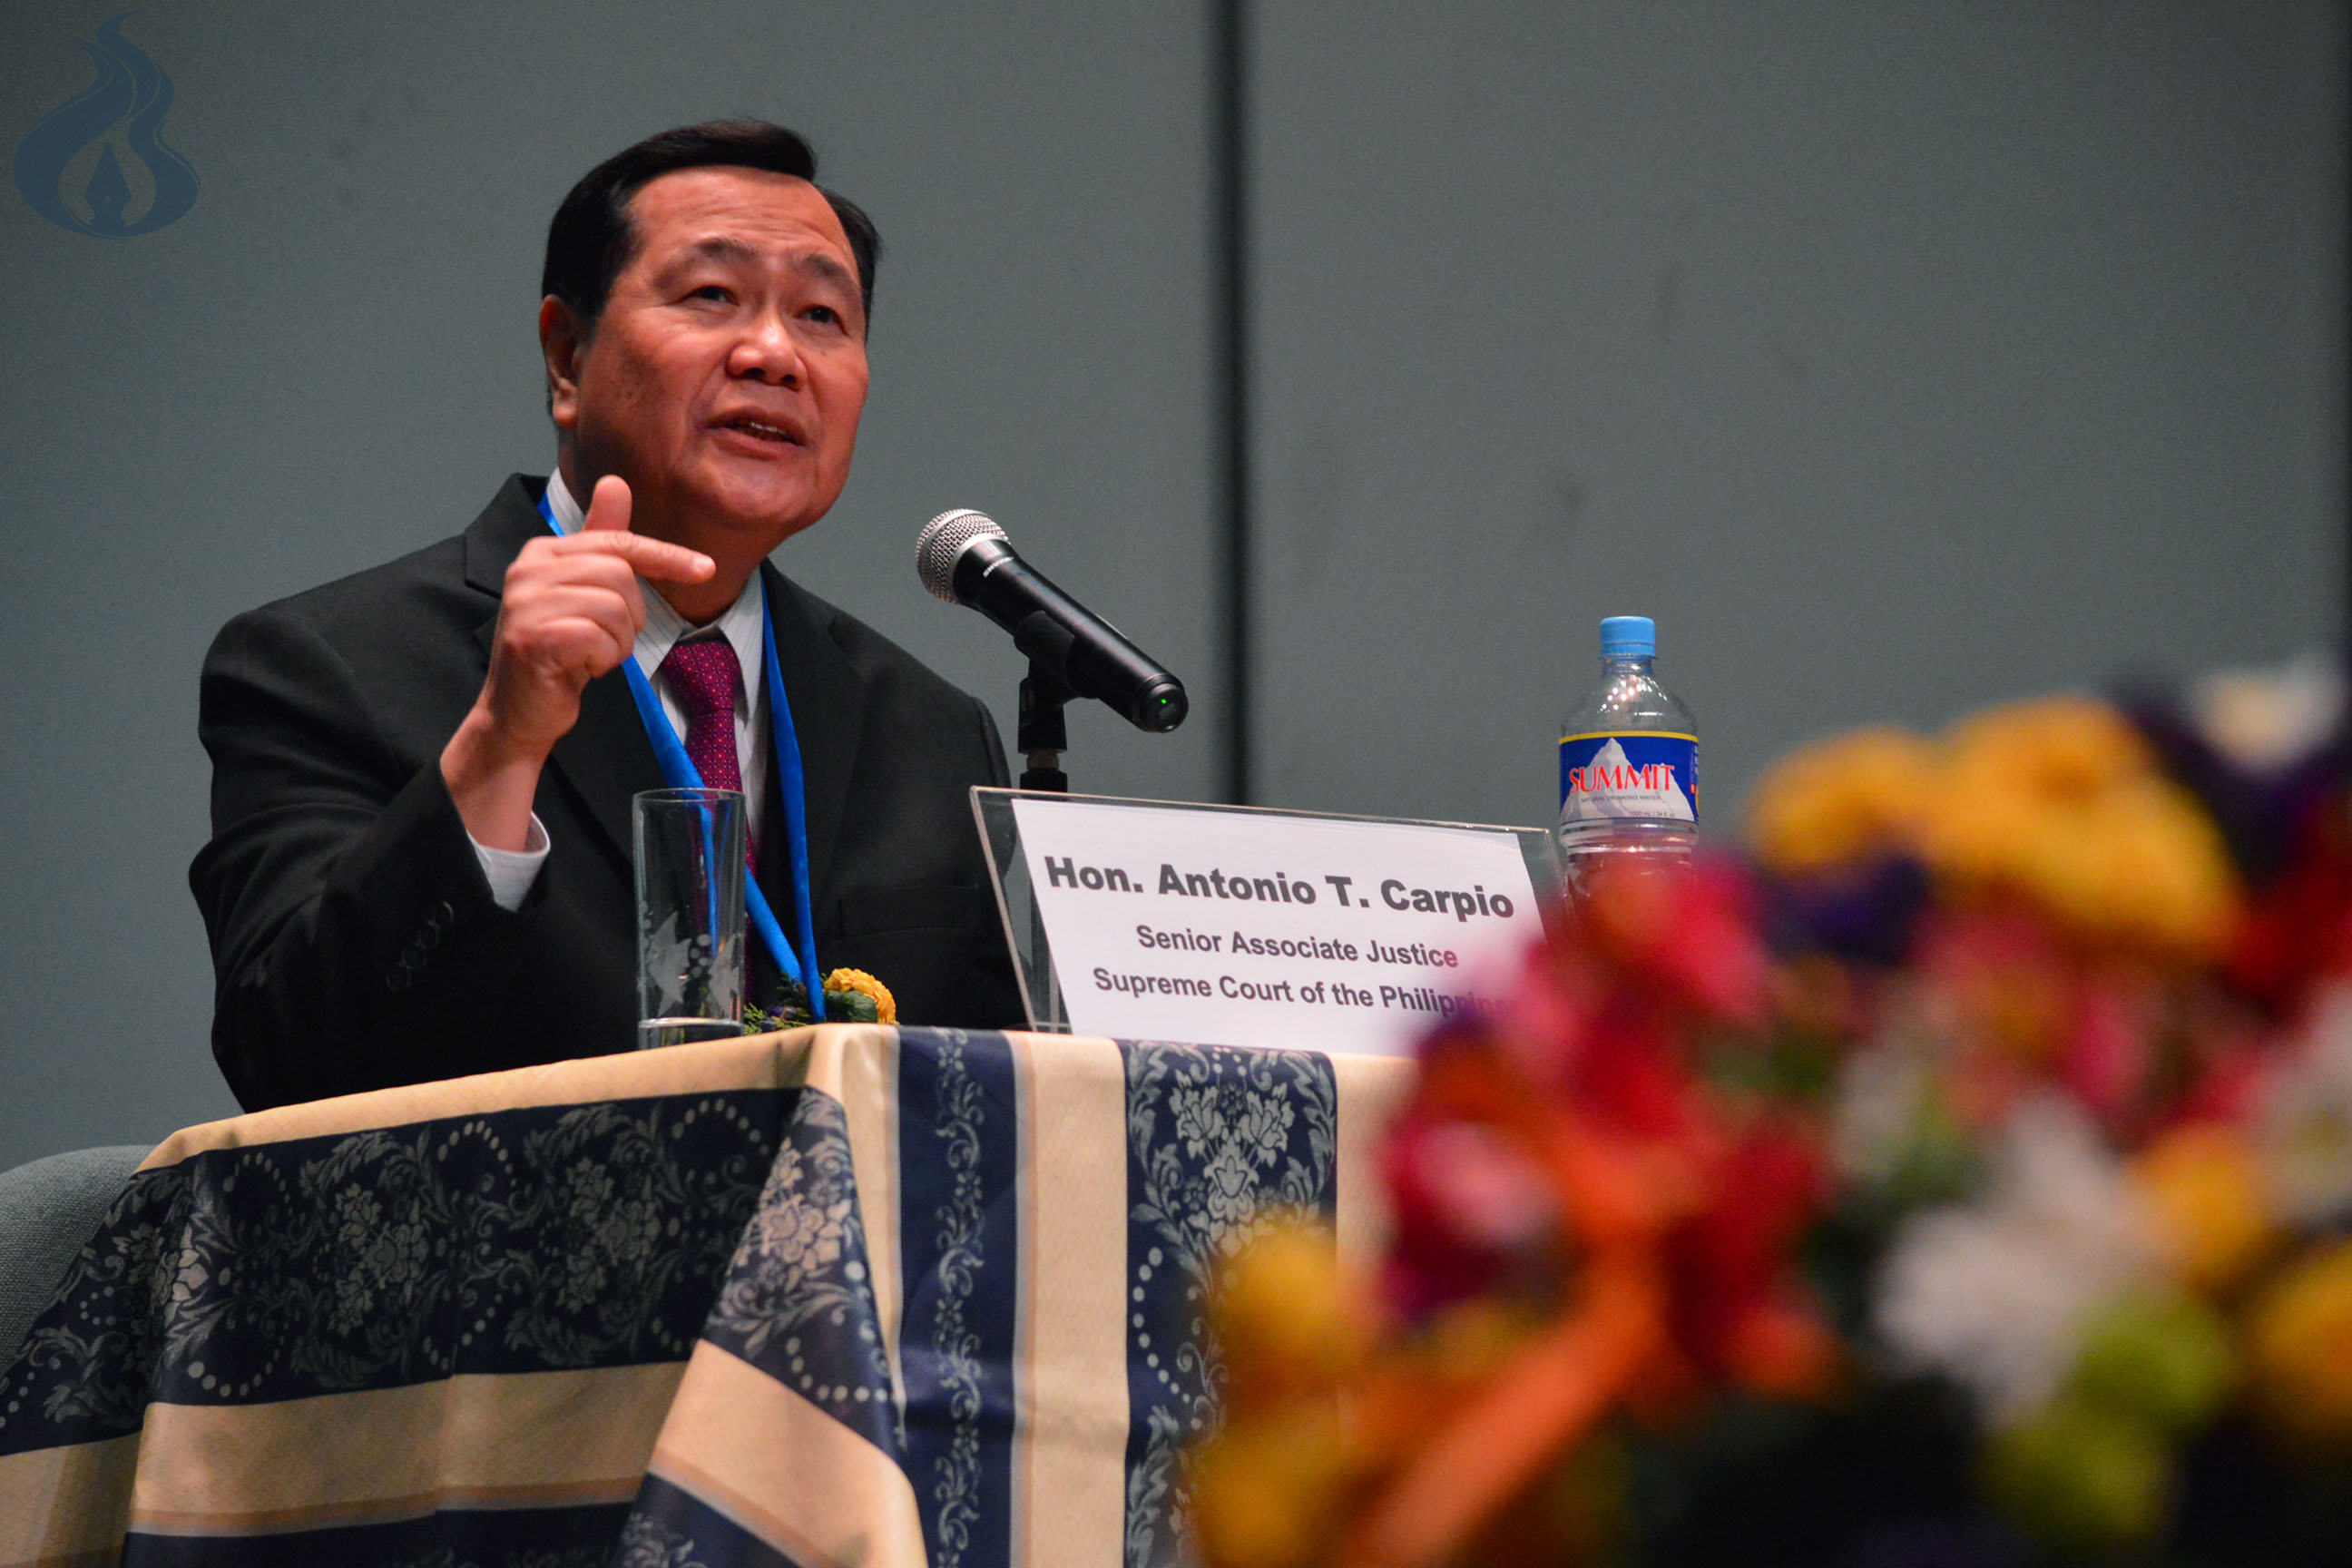 Antonio Carpio entertains questions from the Artlets. photo by JANINE C. PEREA